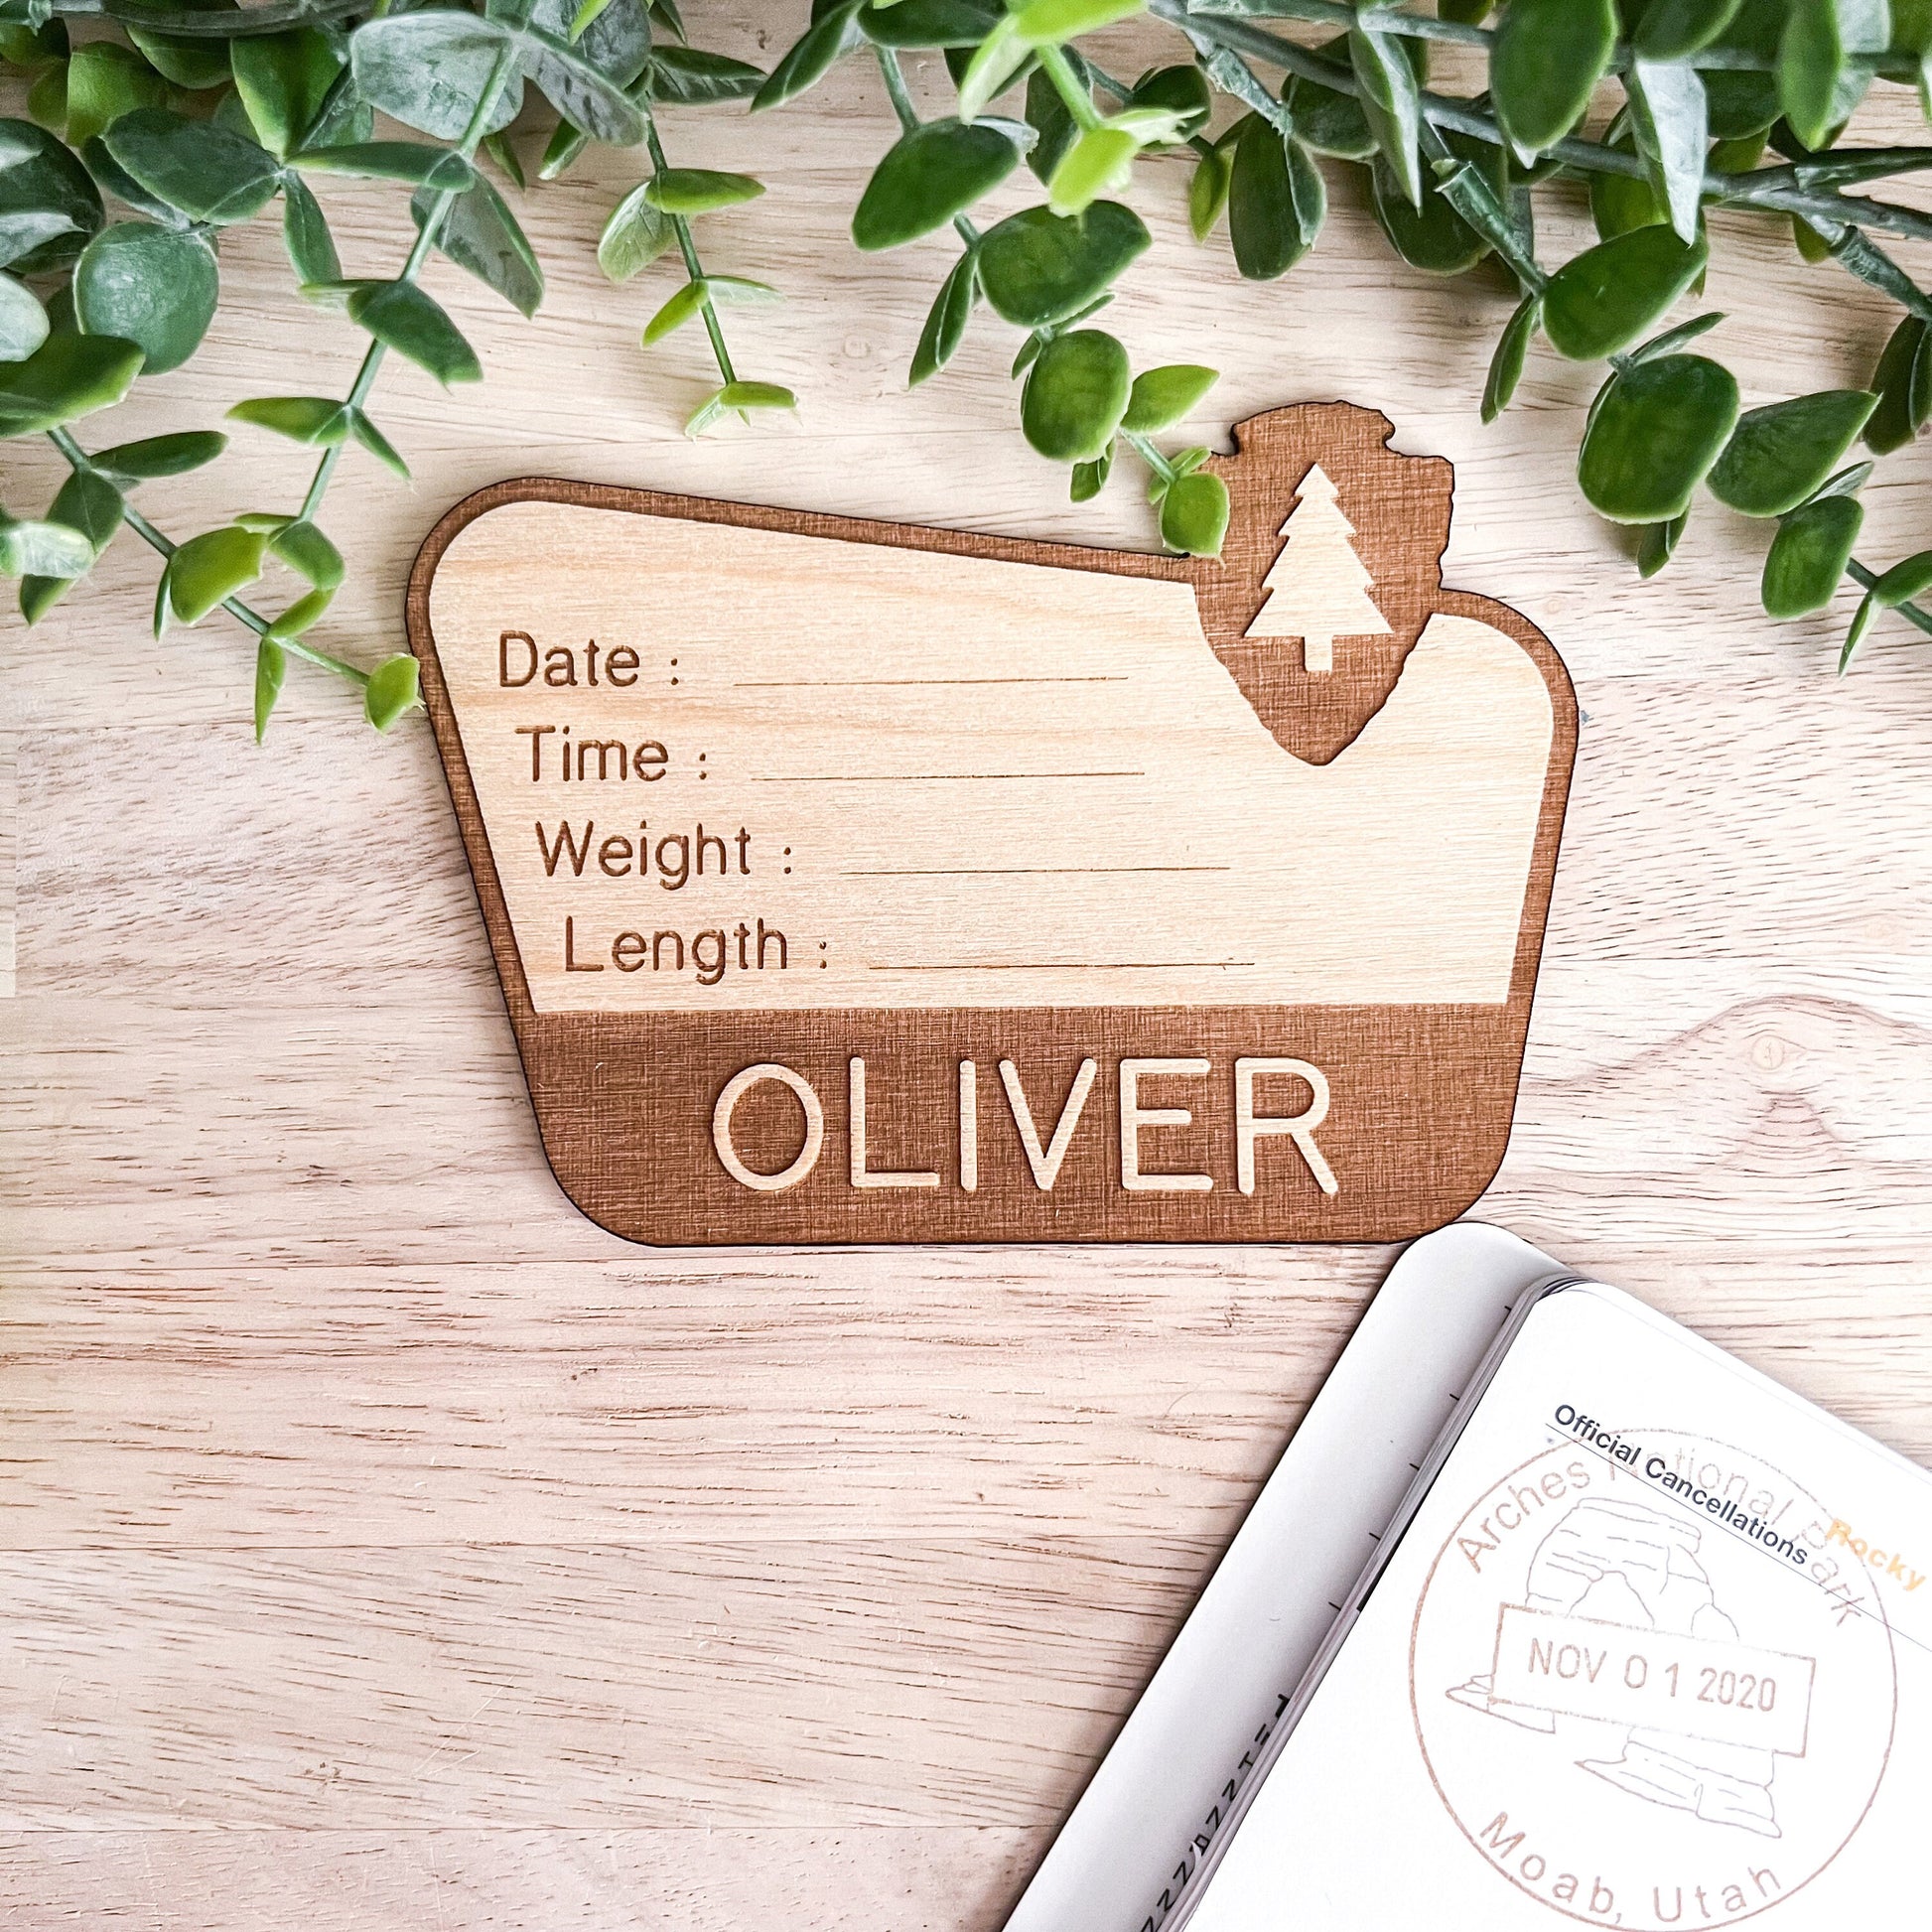 National Park Birth Stats Sign / Baby Name Sign / Wooden New Born Name Sign / Hospital Baby Announcement Sign